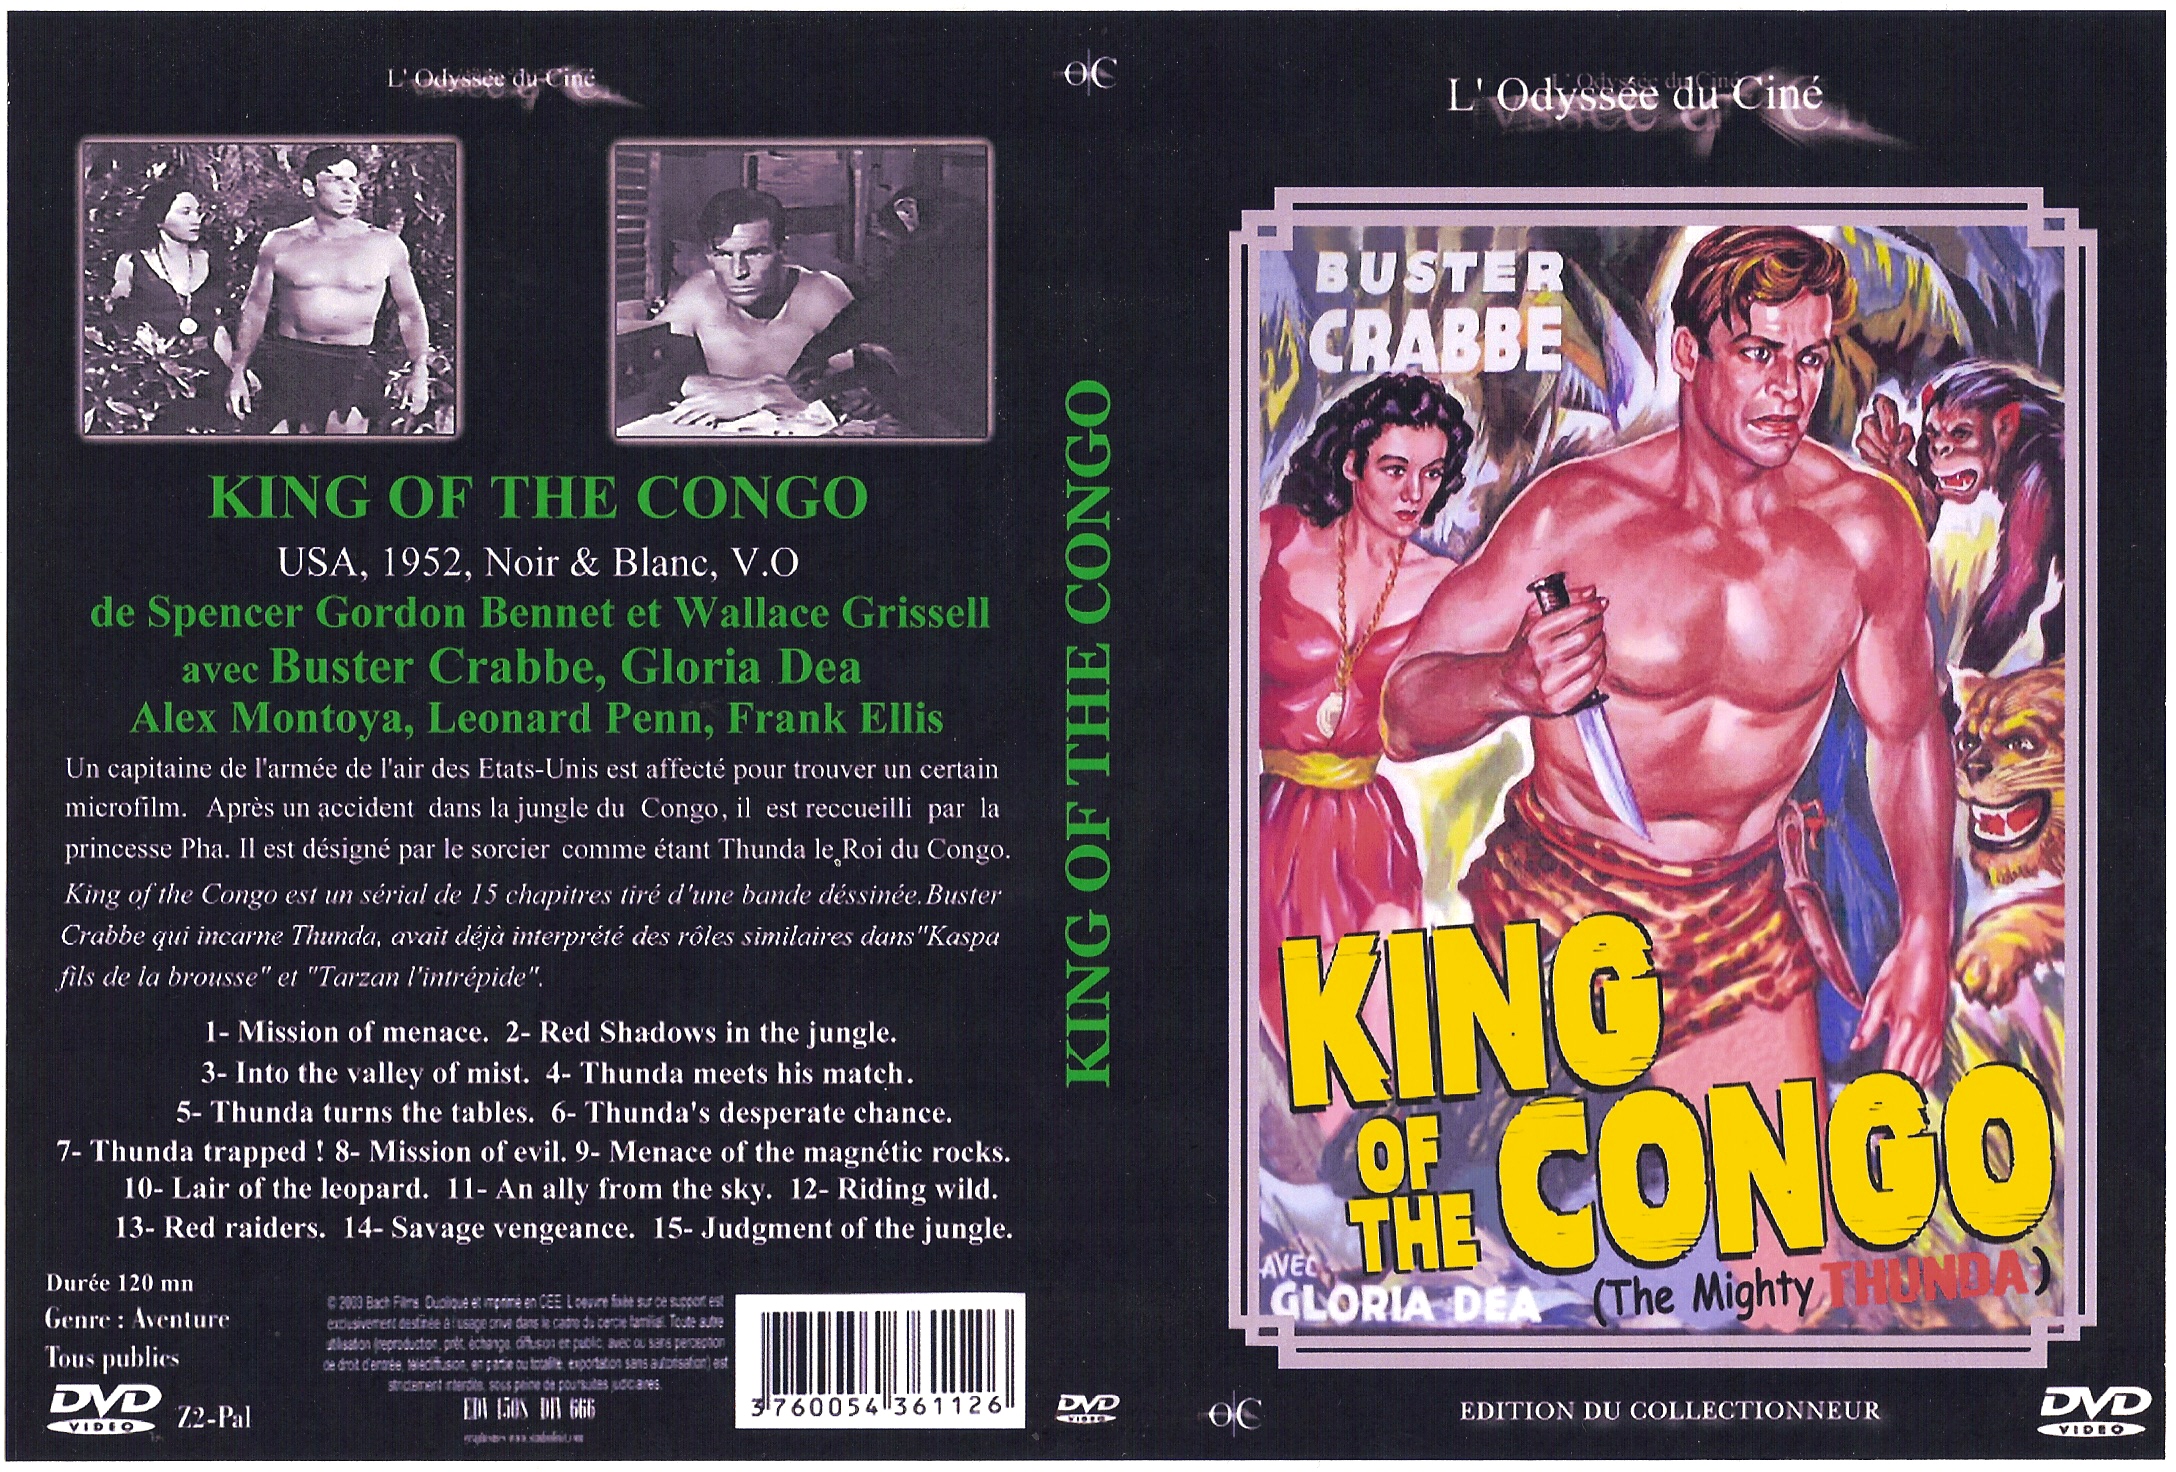 Jaquette DVD King of the Congo